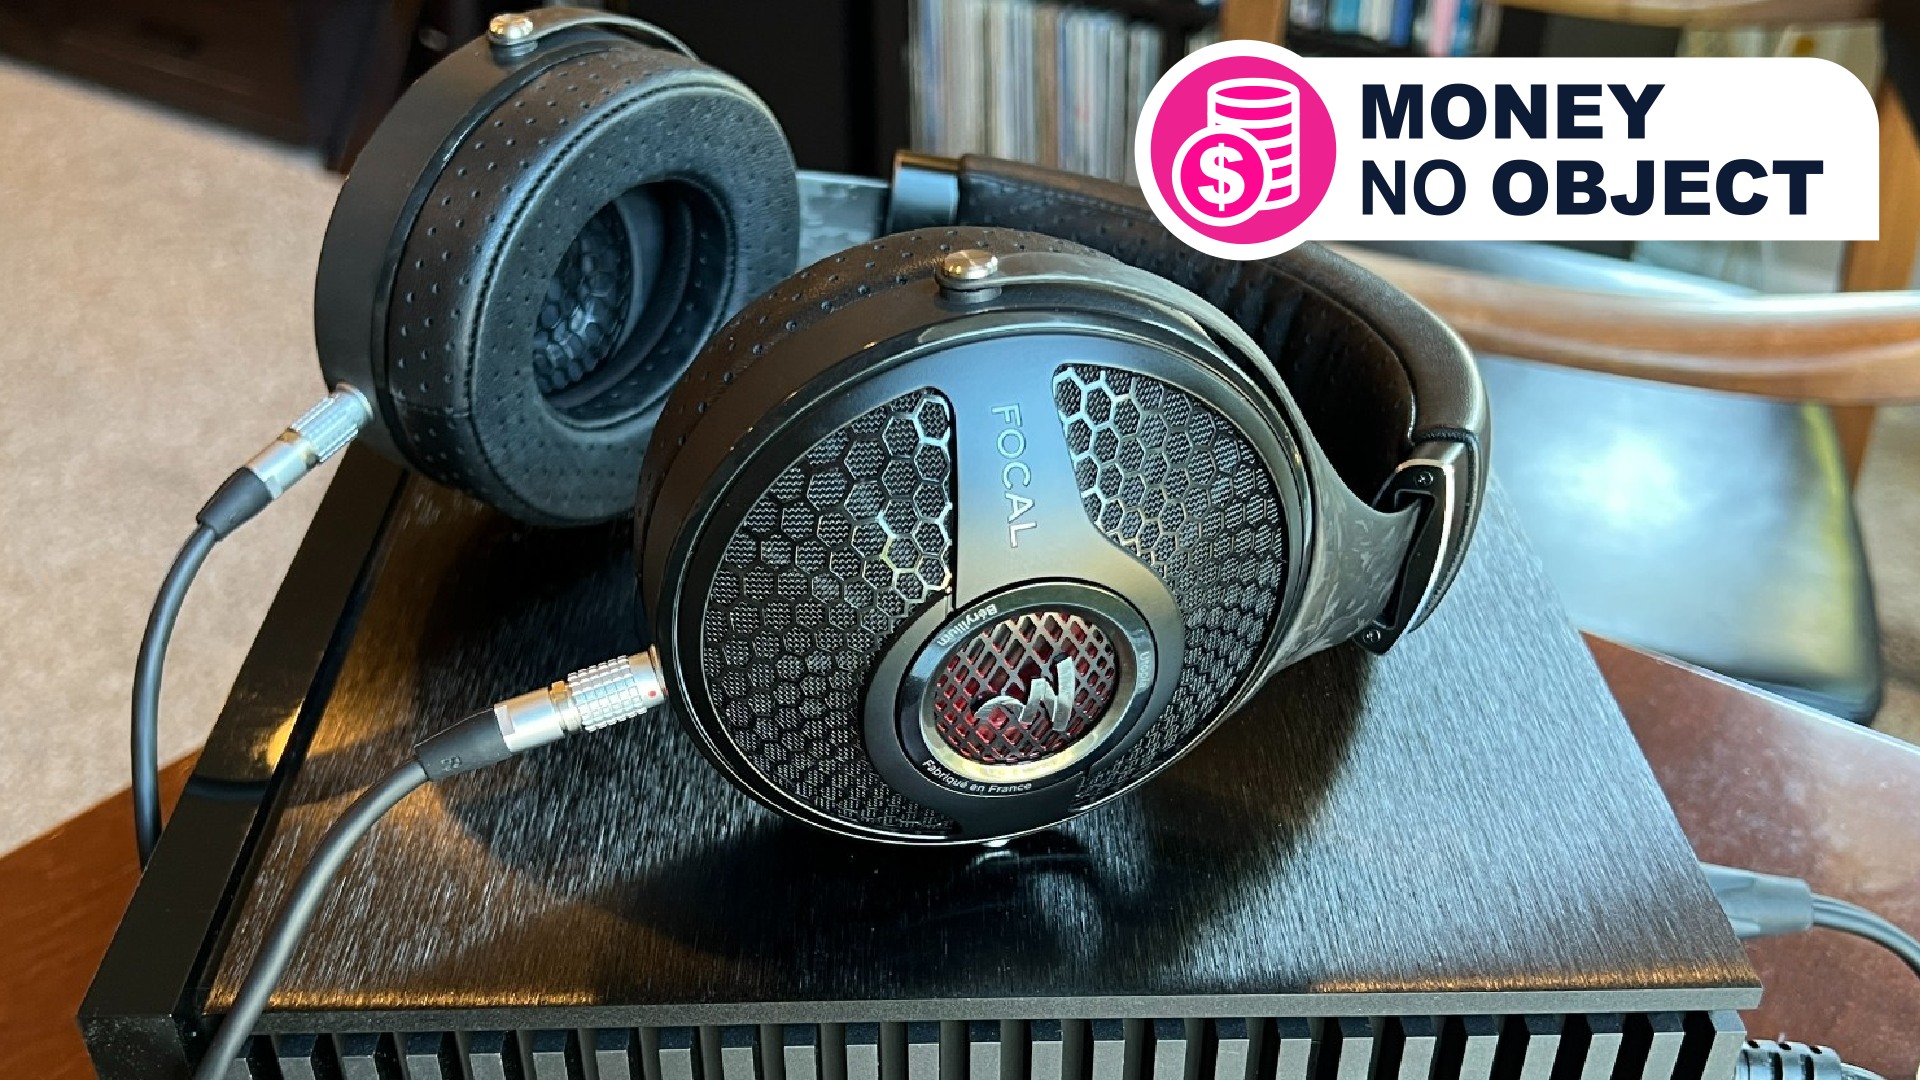 Focal’s luxurious, leather-lined headphones make high-end listening ...